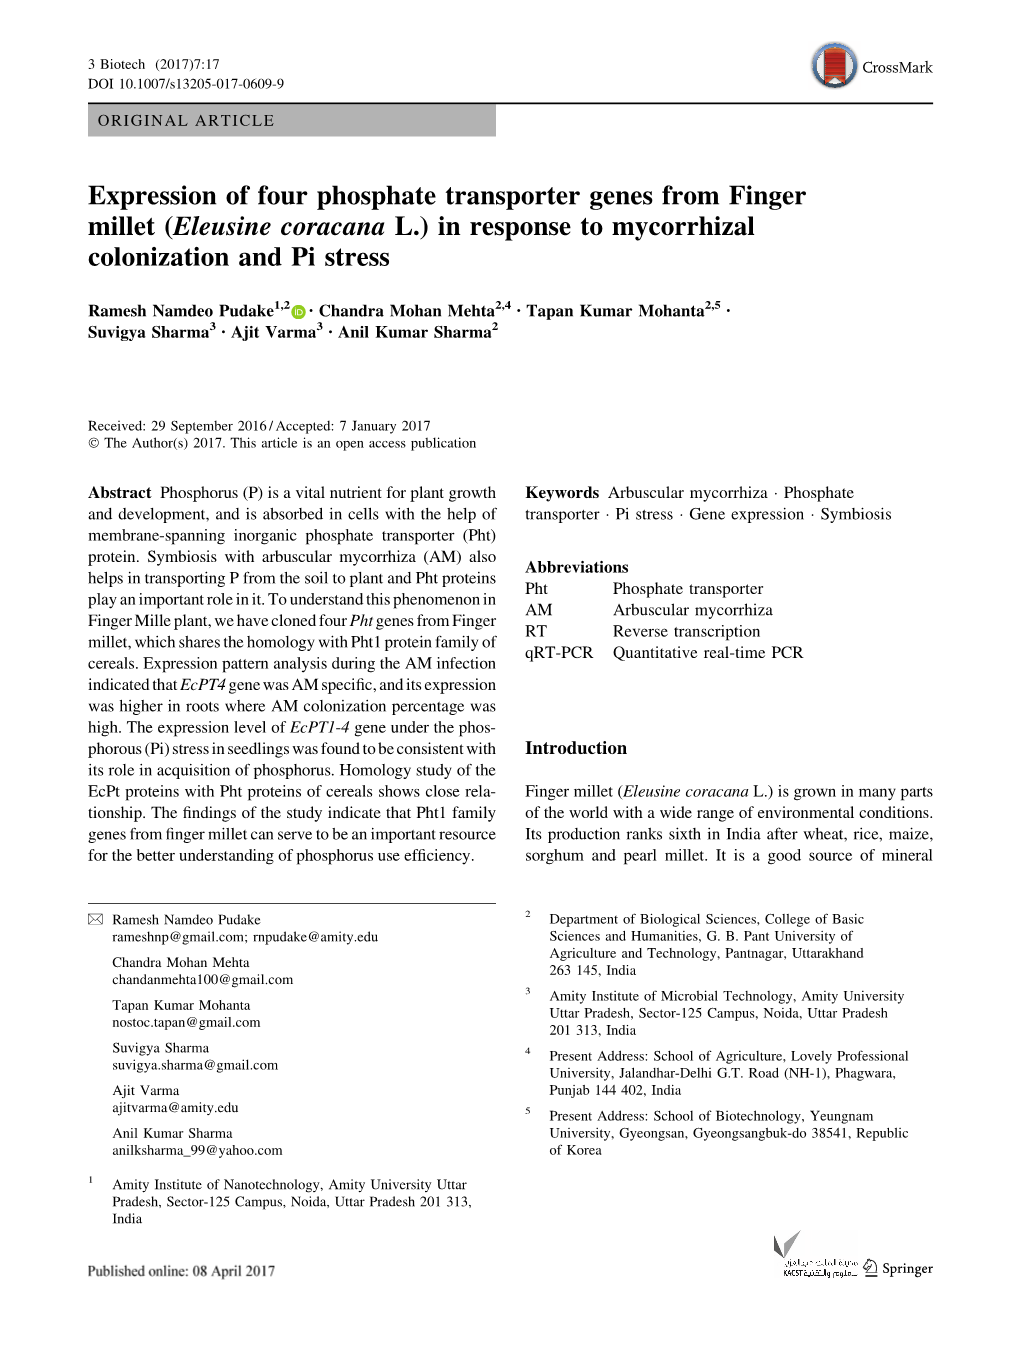 Expression of Four Phosphate Transporter Genes from Finger Millet (Eleusine Coracana L.) in Response to Mycorrhizal Colonization and Pi Stress